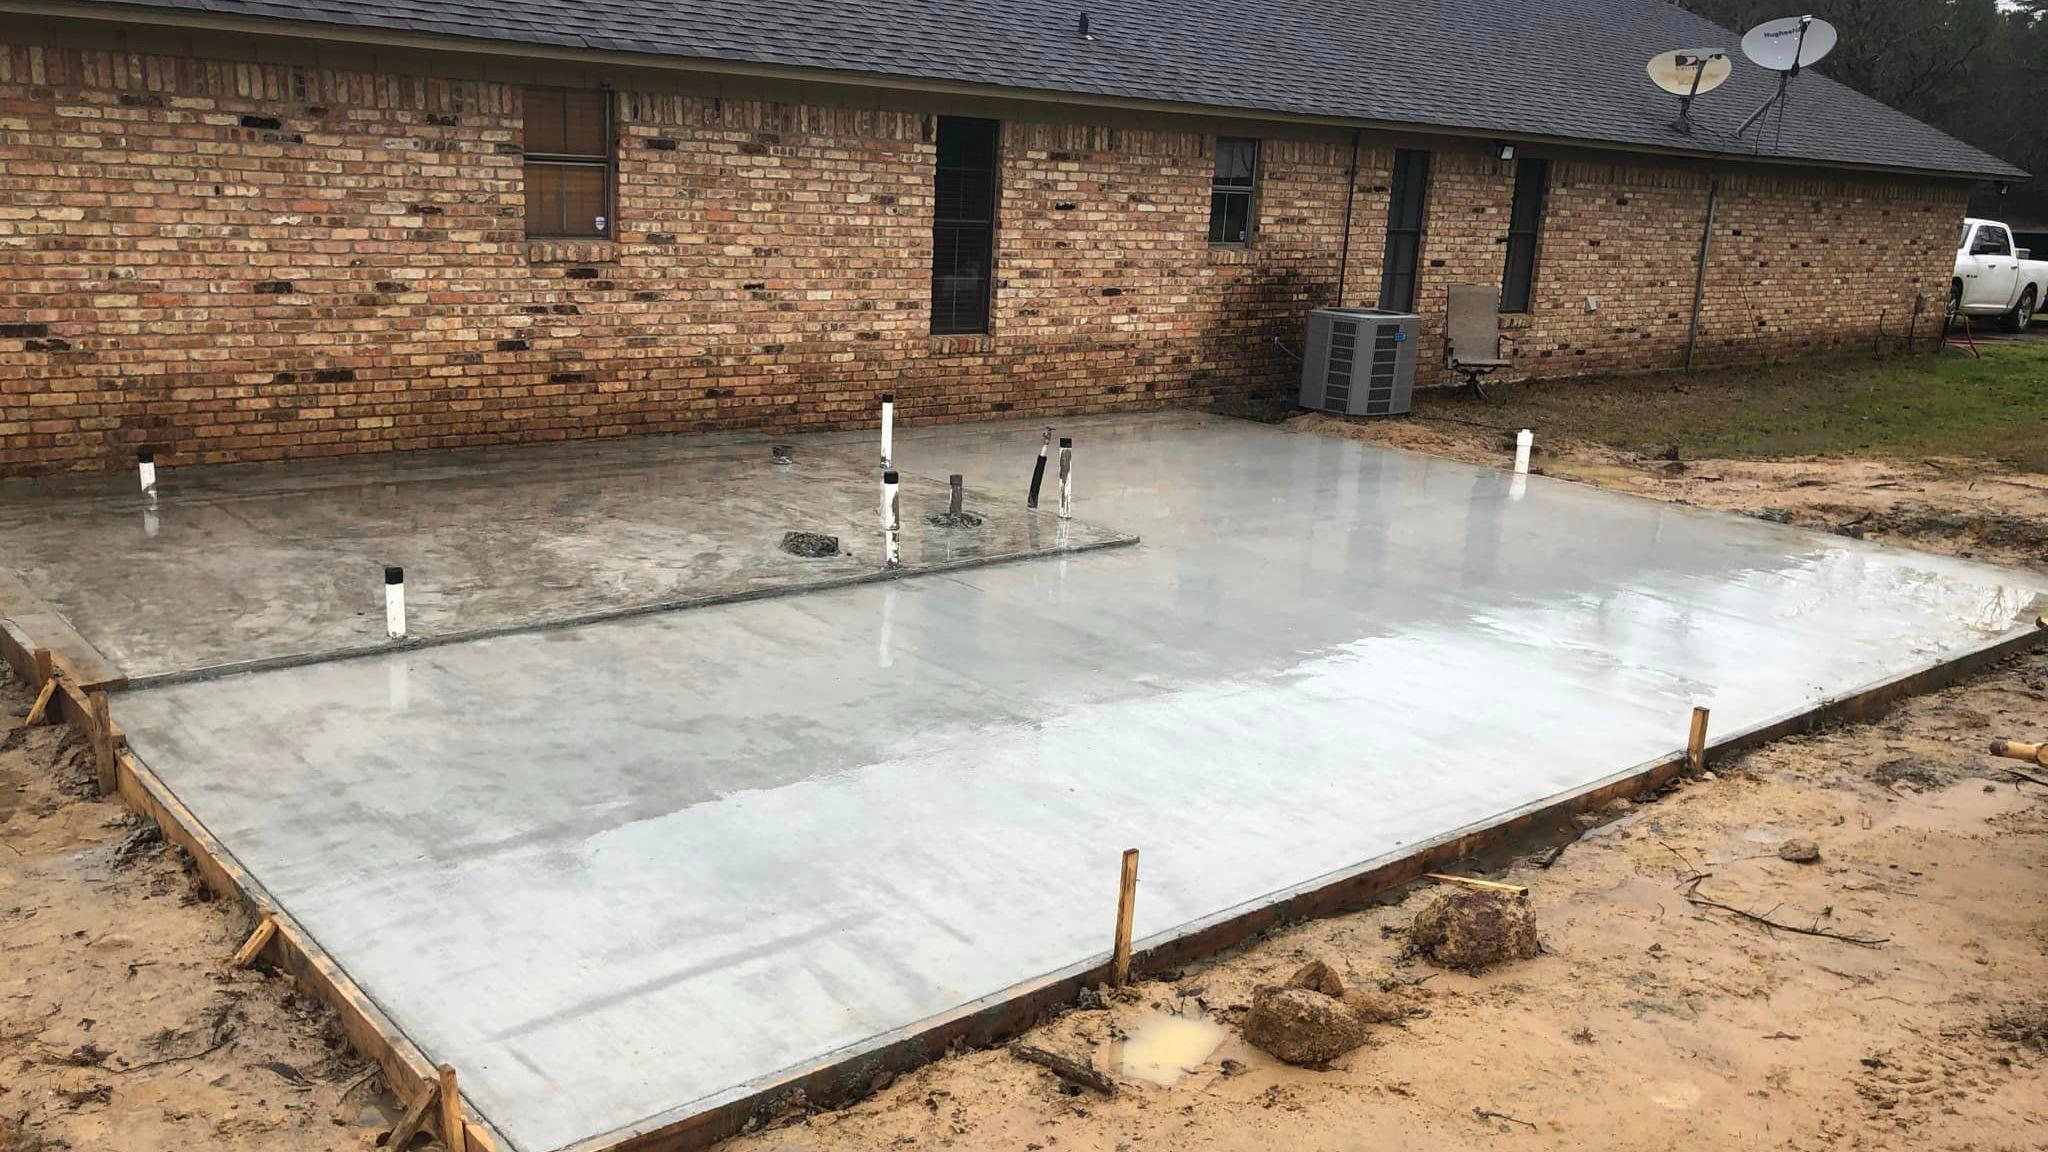 When it comes to enhancing the curb appeal and functionality of your home, ETX Concrete Works is your residential concrete contractor of choice. From driveways to patios, we provide expert residential concrete services tailored to your needs. Our commitment to quality and customer satisfaction ensures your home projects are executed flawlessly.